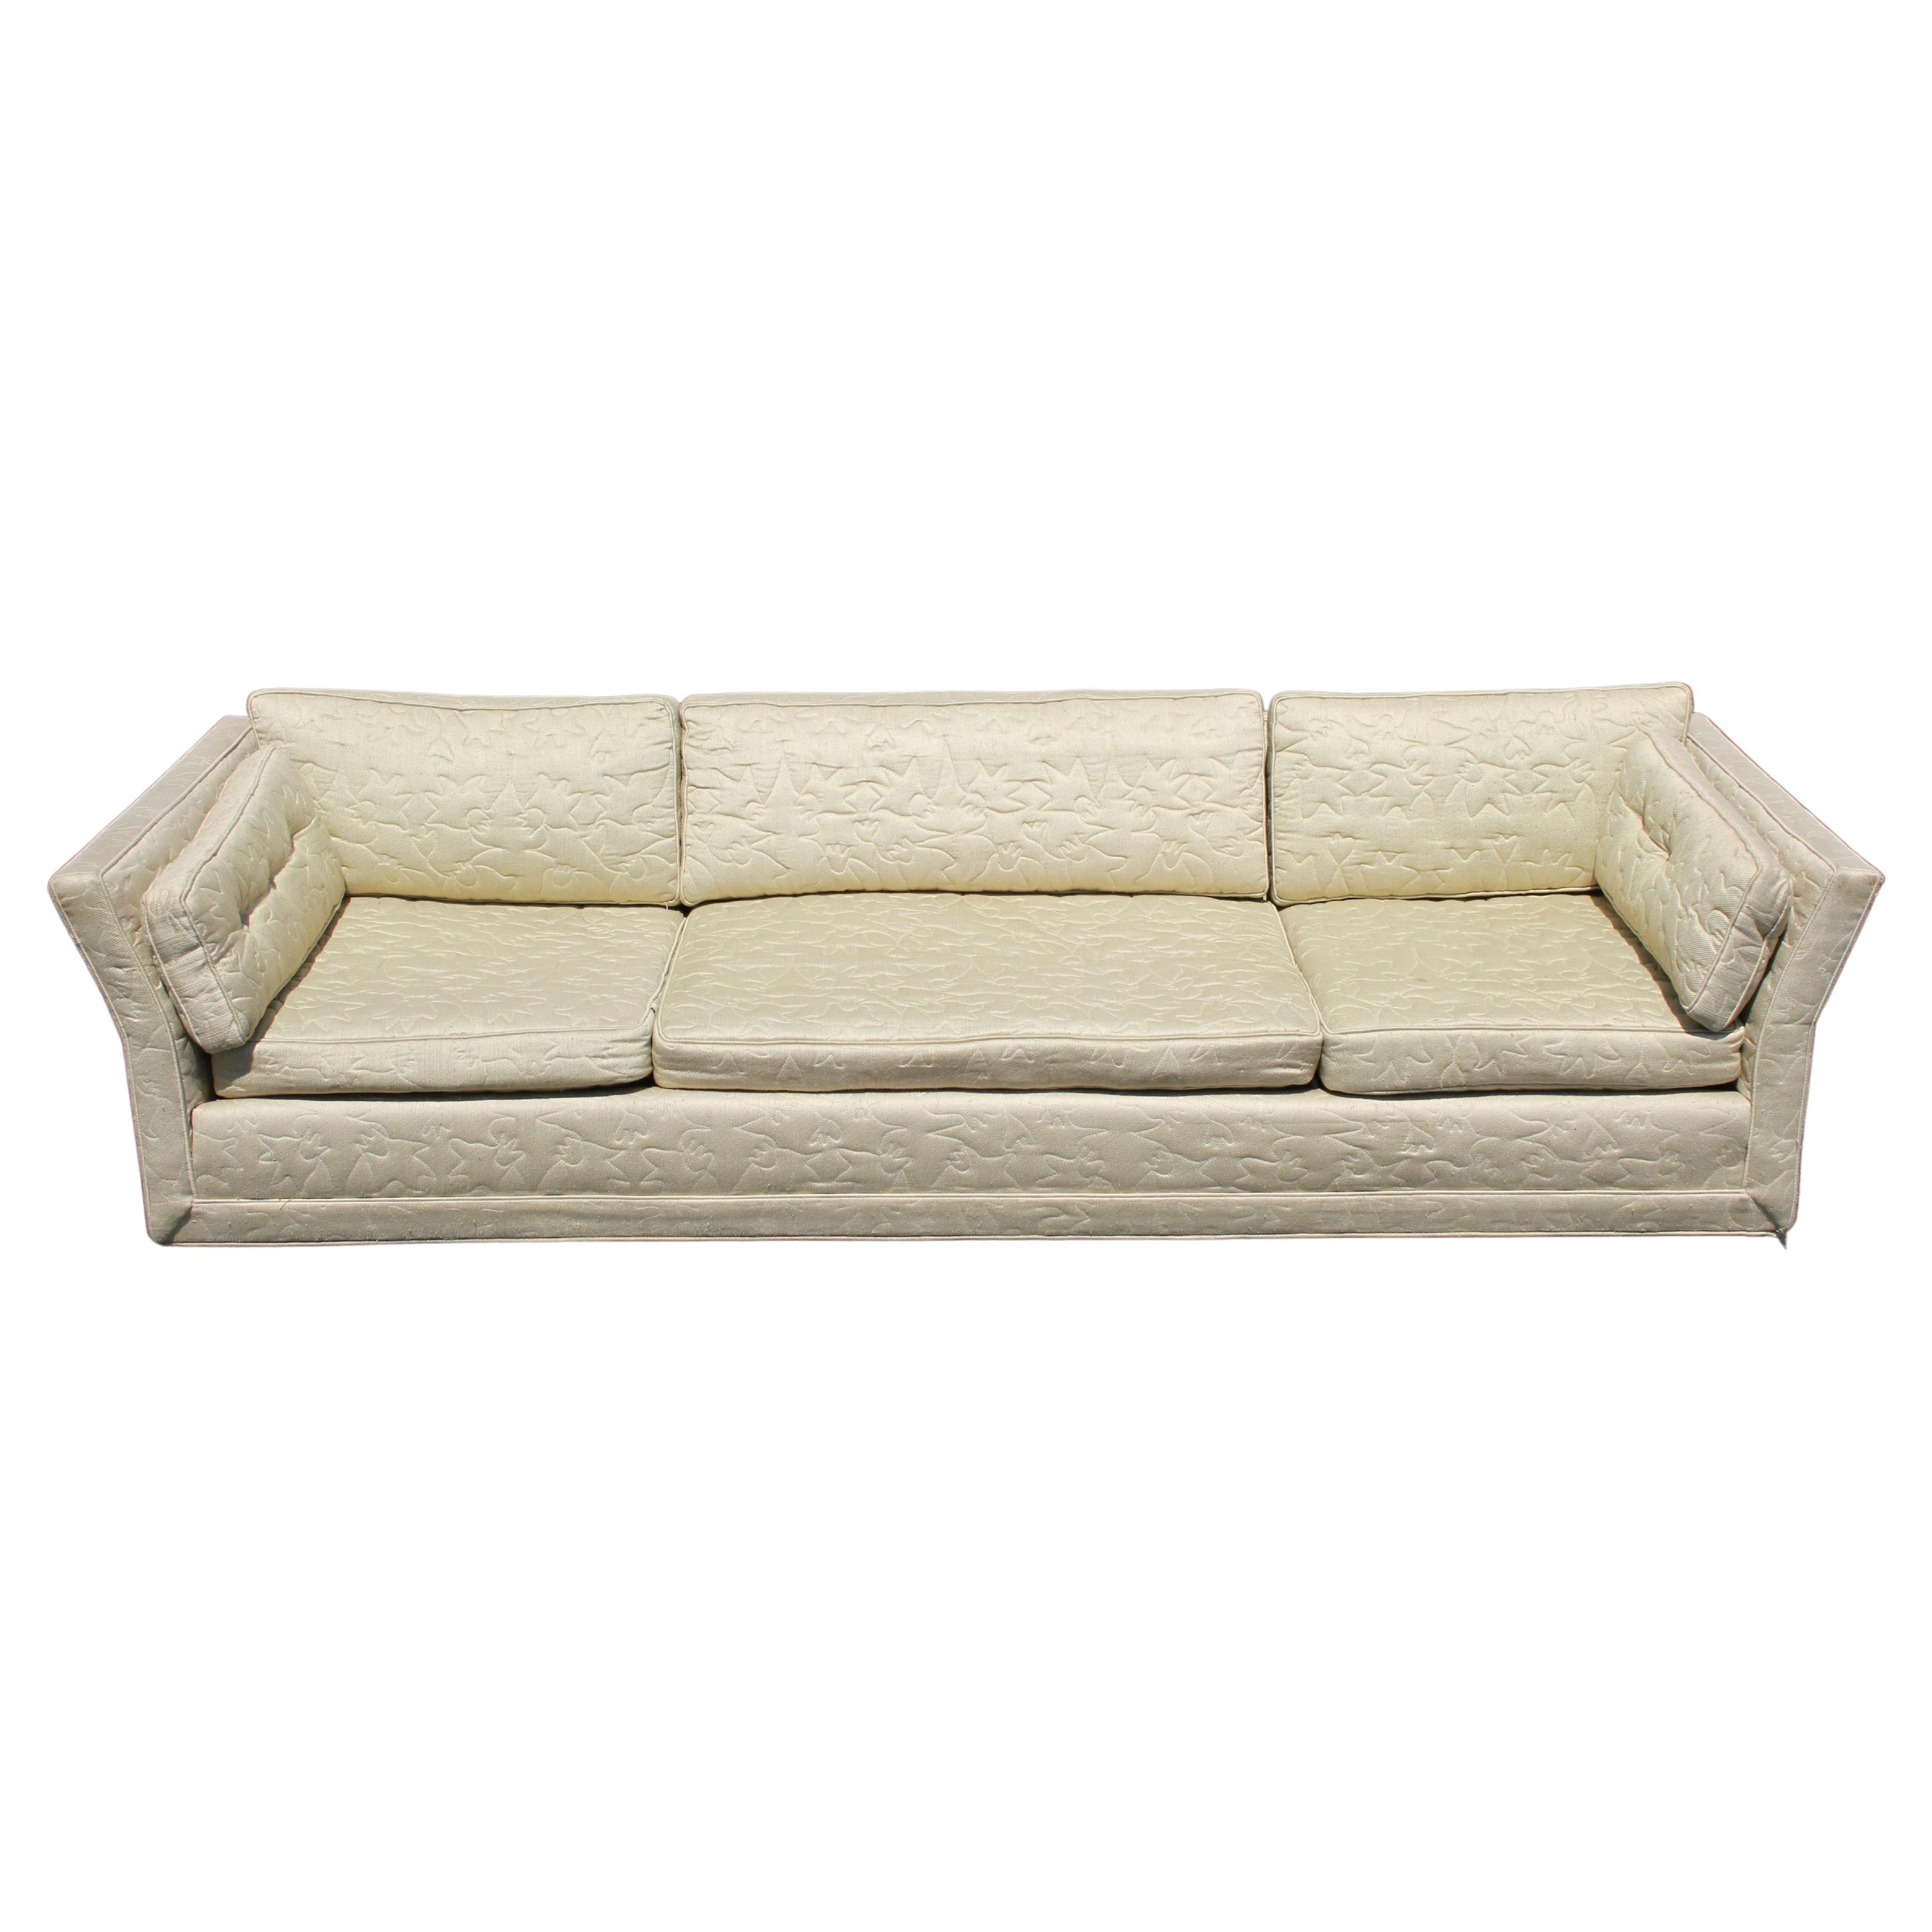 Large Mid-Century Modern Low Custom Sofa by Flair Inc on Brass Castors, Project For Sale